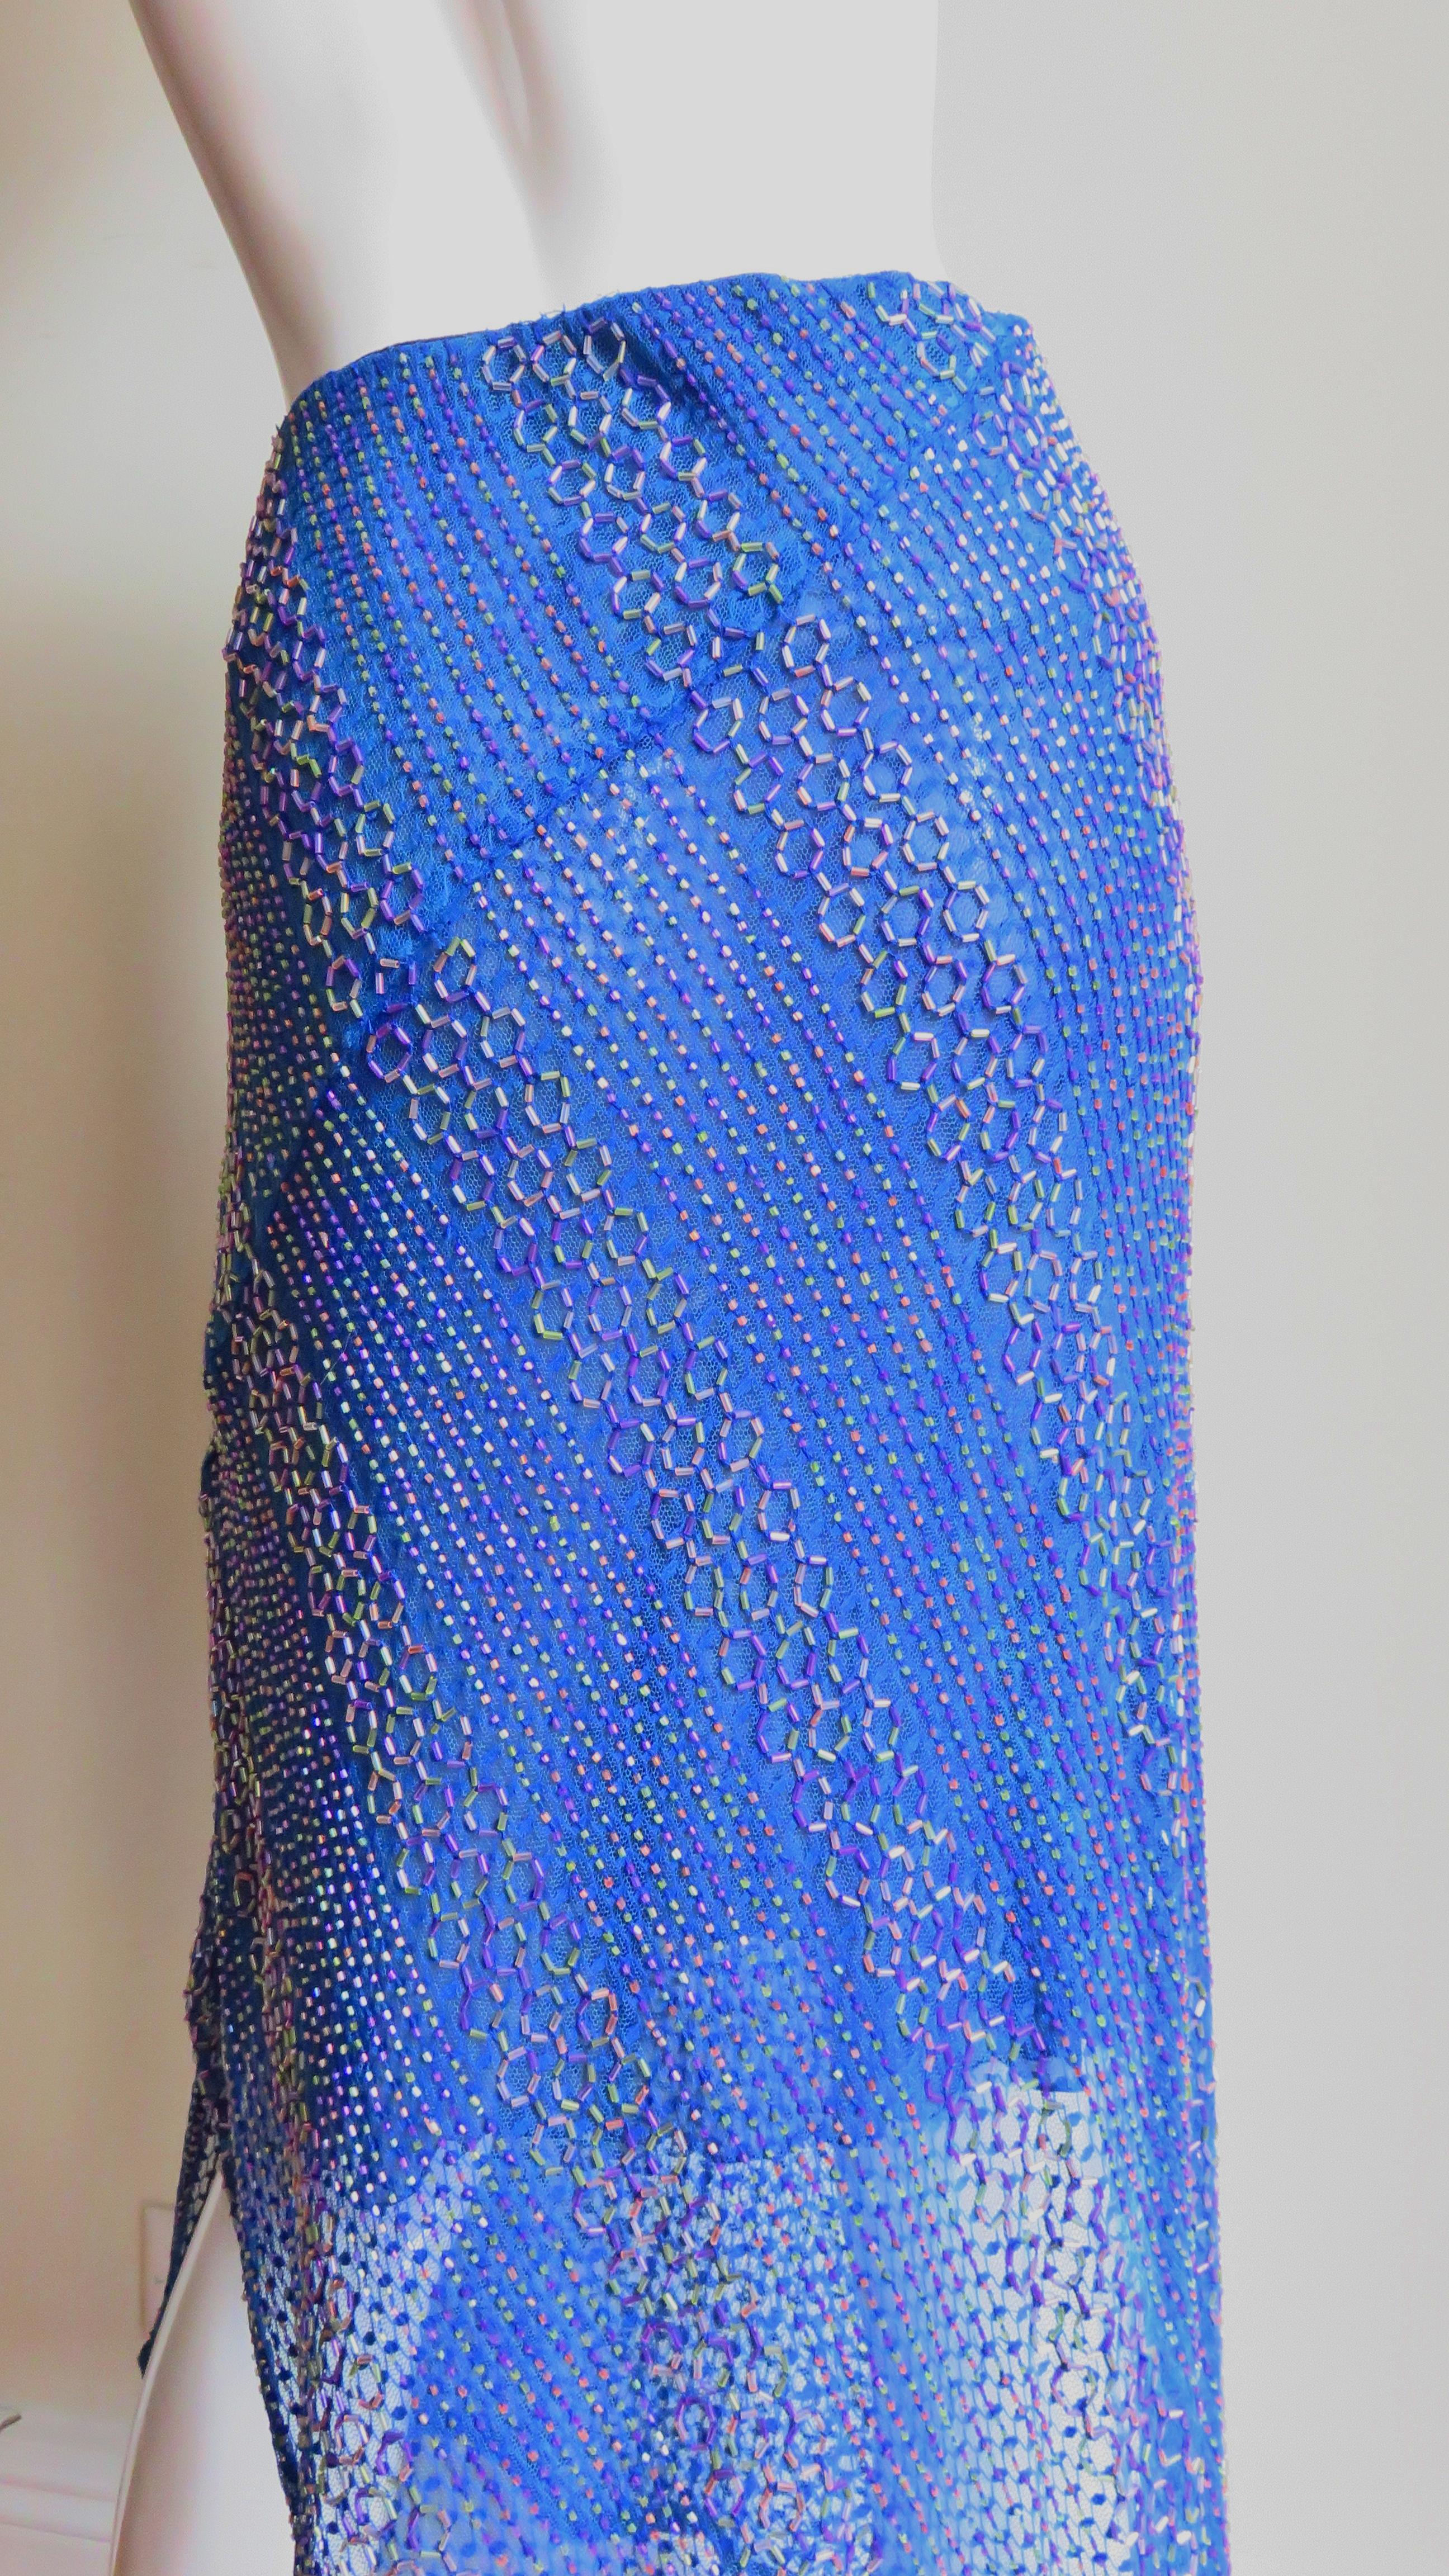 Ordinary People New Skirt with Beading For Sale 4